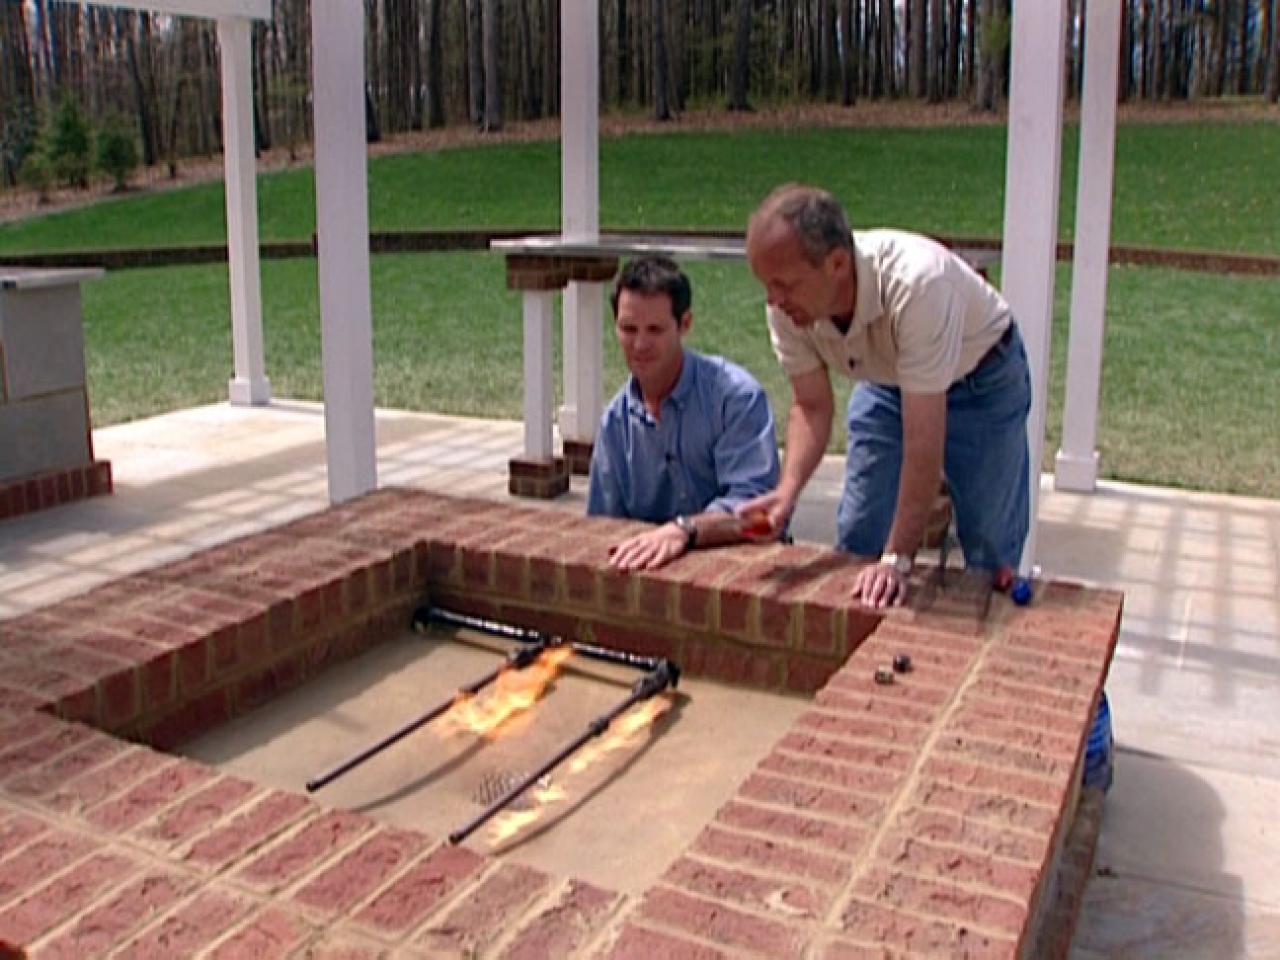 How To Hook Up The Gas For A Fire Pit, Gas Pipe For Outdoor Fire Pit